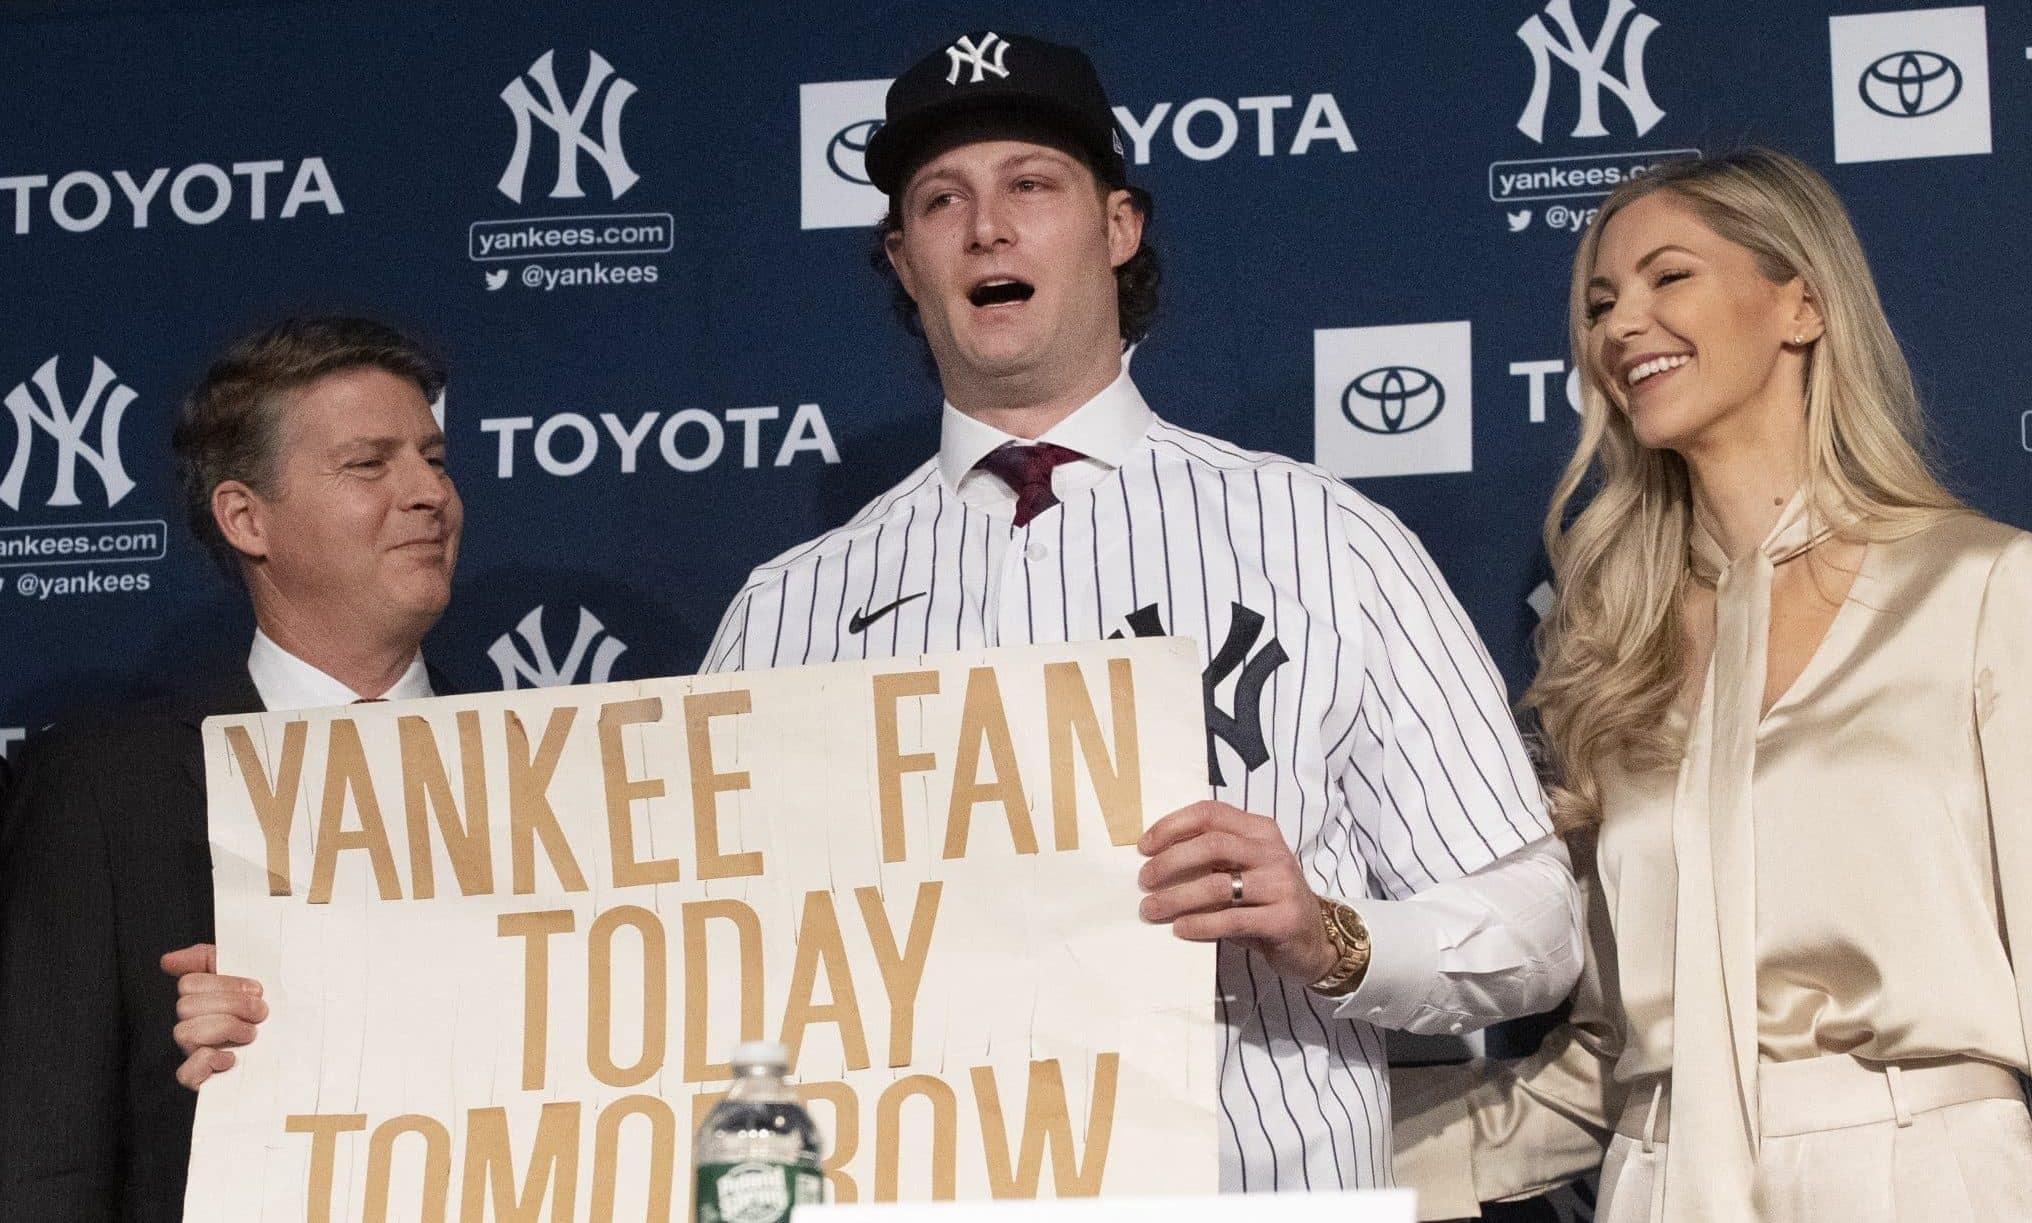 New York Yankees pitcher Gerrit Cole, center, holds a sign he used as a young Yankees fan, as he is introduced as the baseball clubs newest player during a baseball media availability, Wednesday, Dec. 18, 2019 in New York. He is joined by team owner Hal Steinbrenner, left, and his wife, Amy Cole.